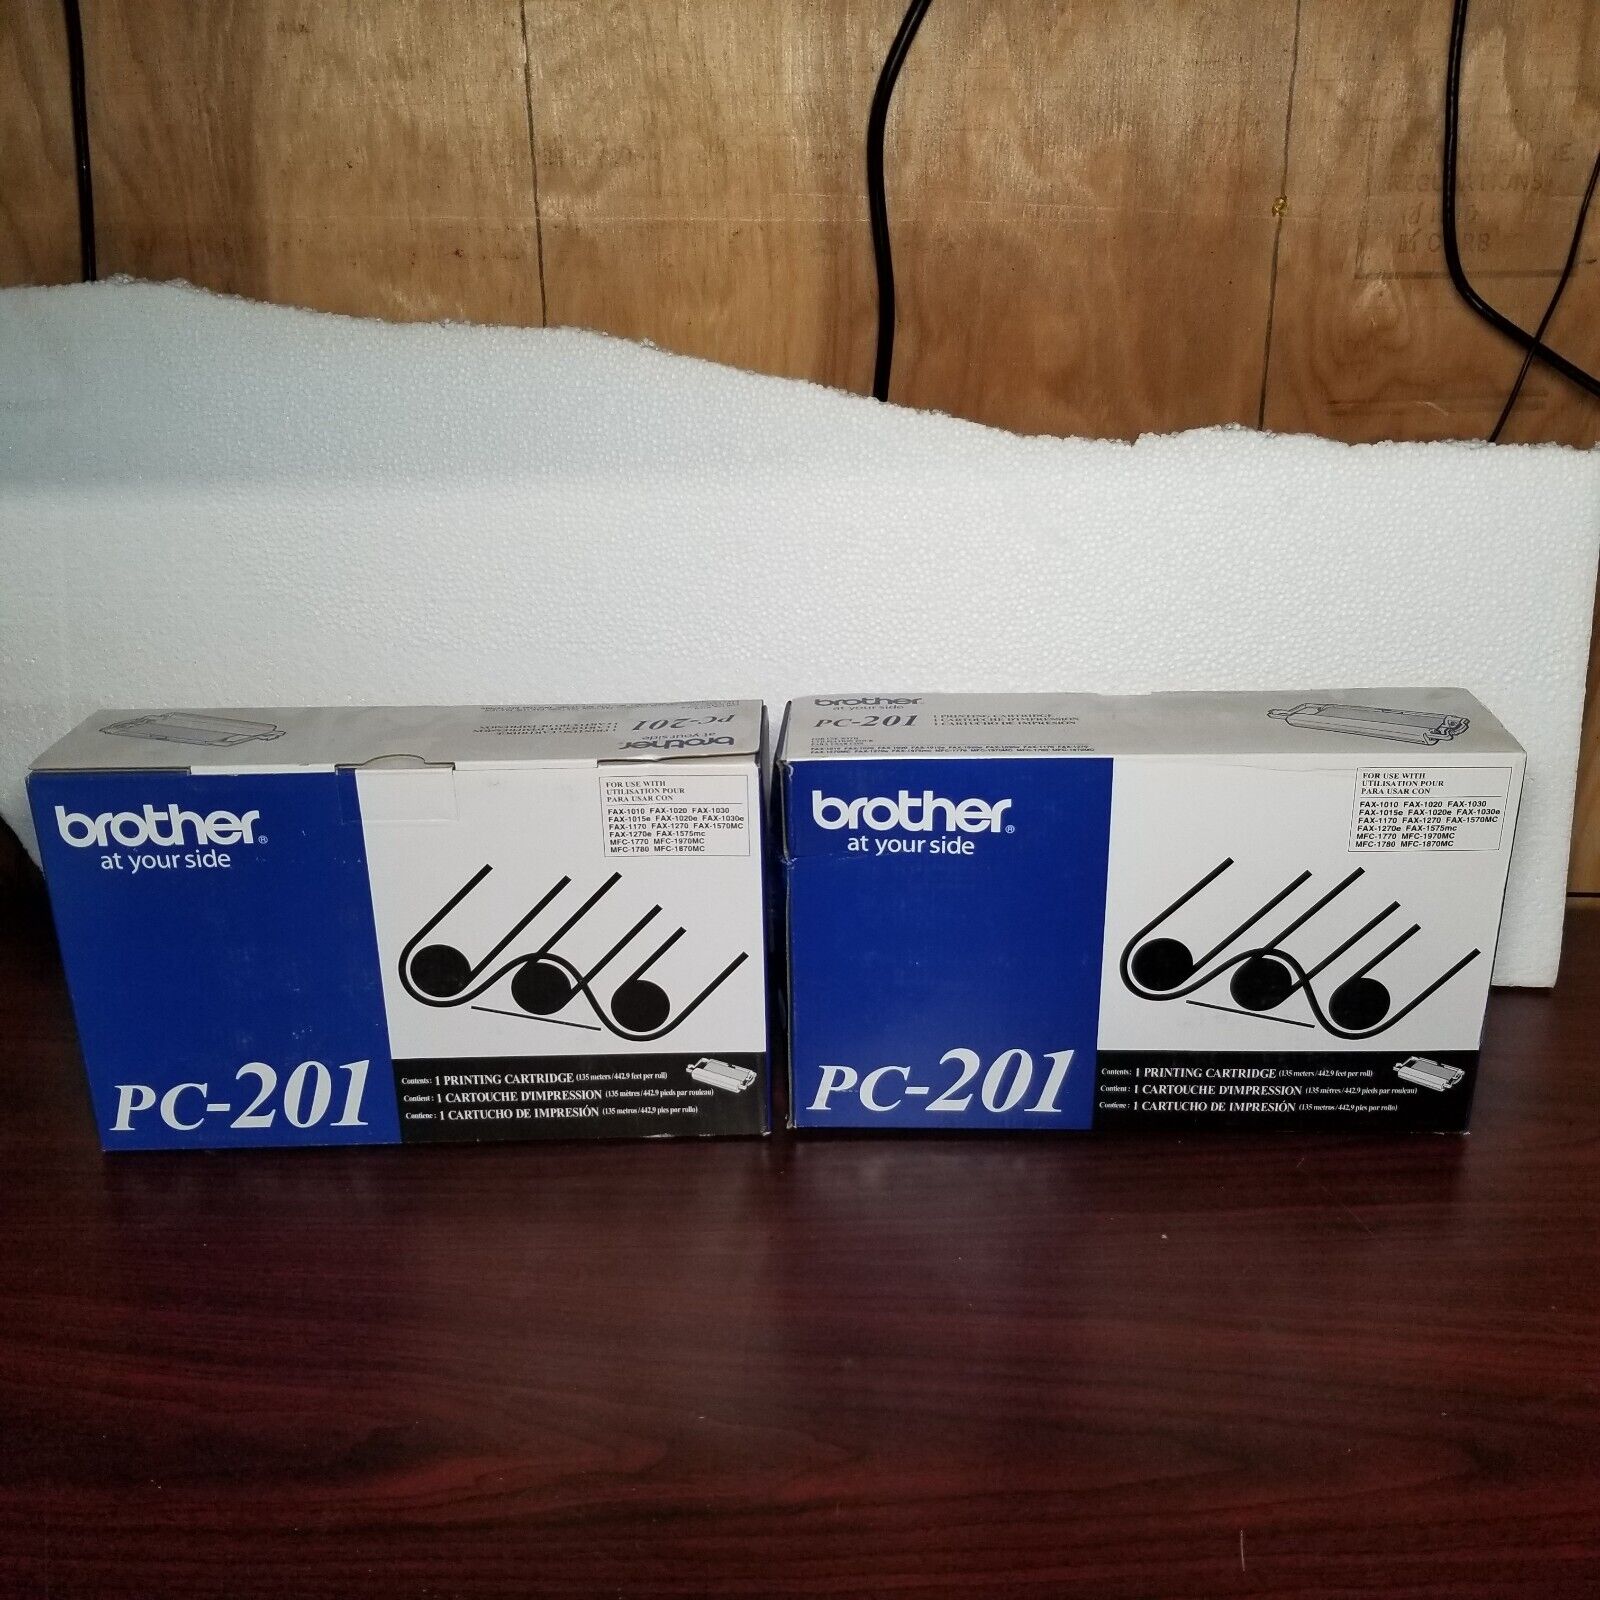 2 X Brother PC-201 Fax Cartridge OEM FAX-1010-1030, 1170, New Sealed #69